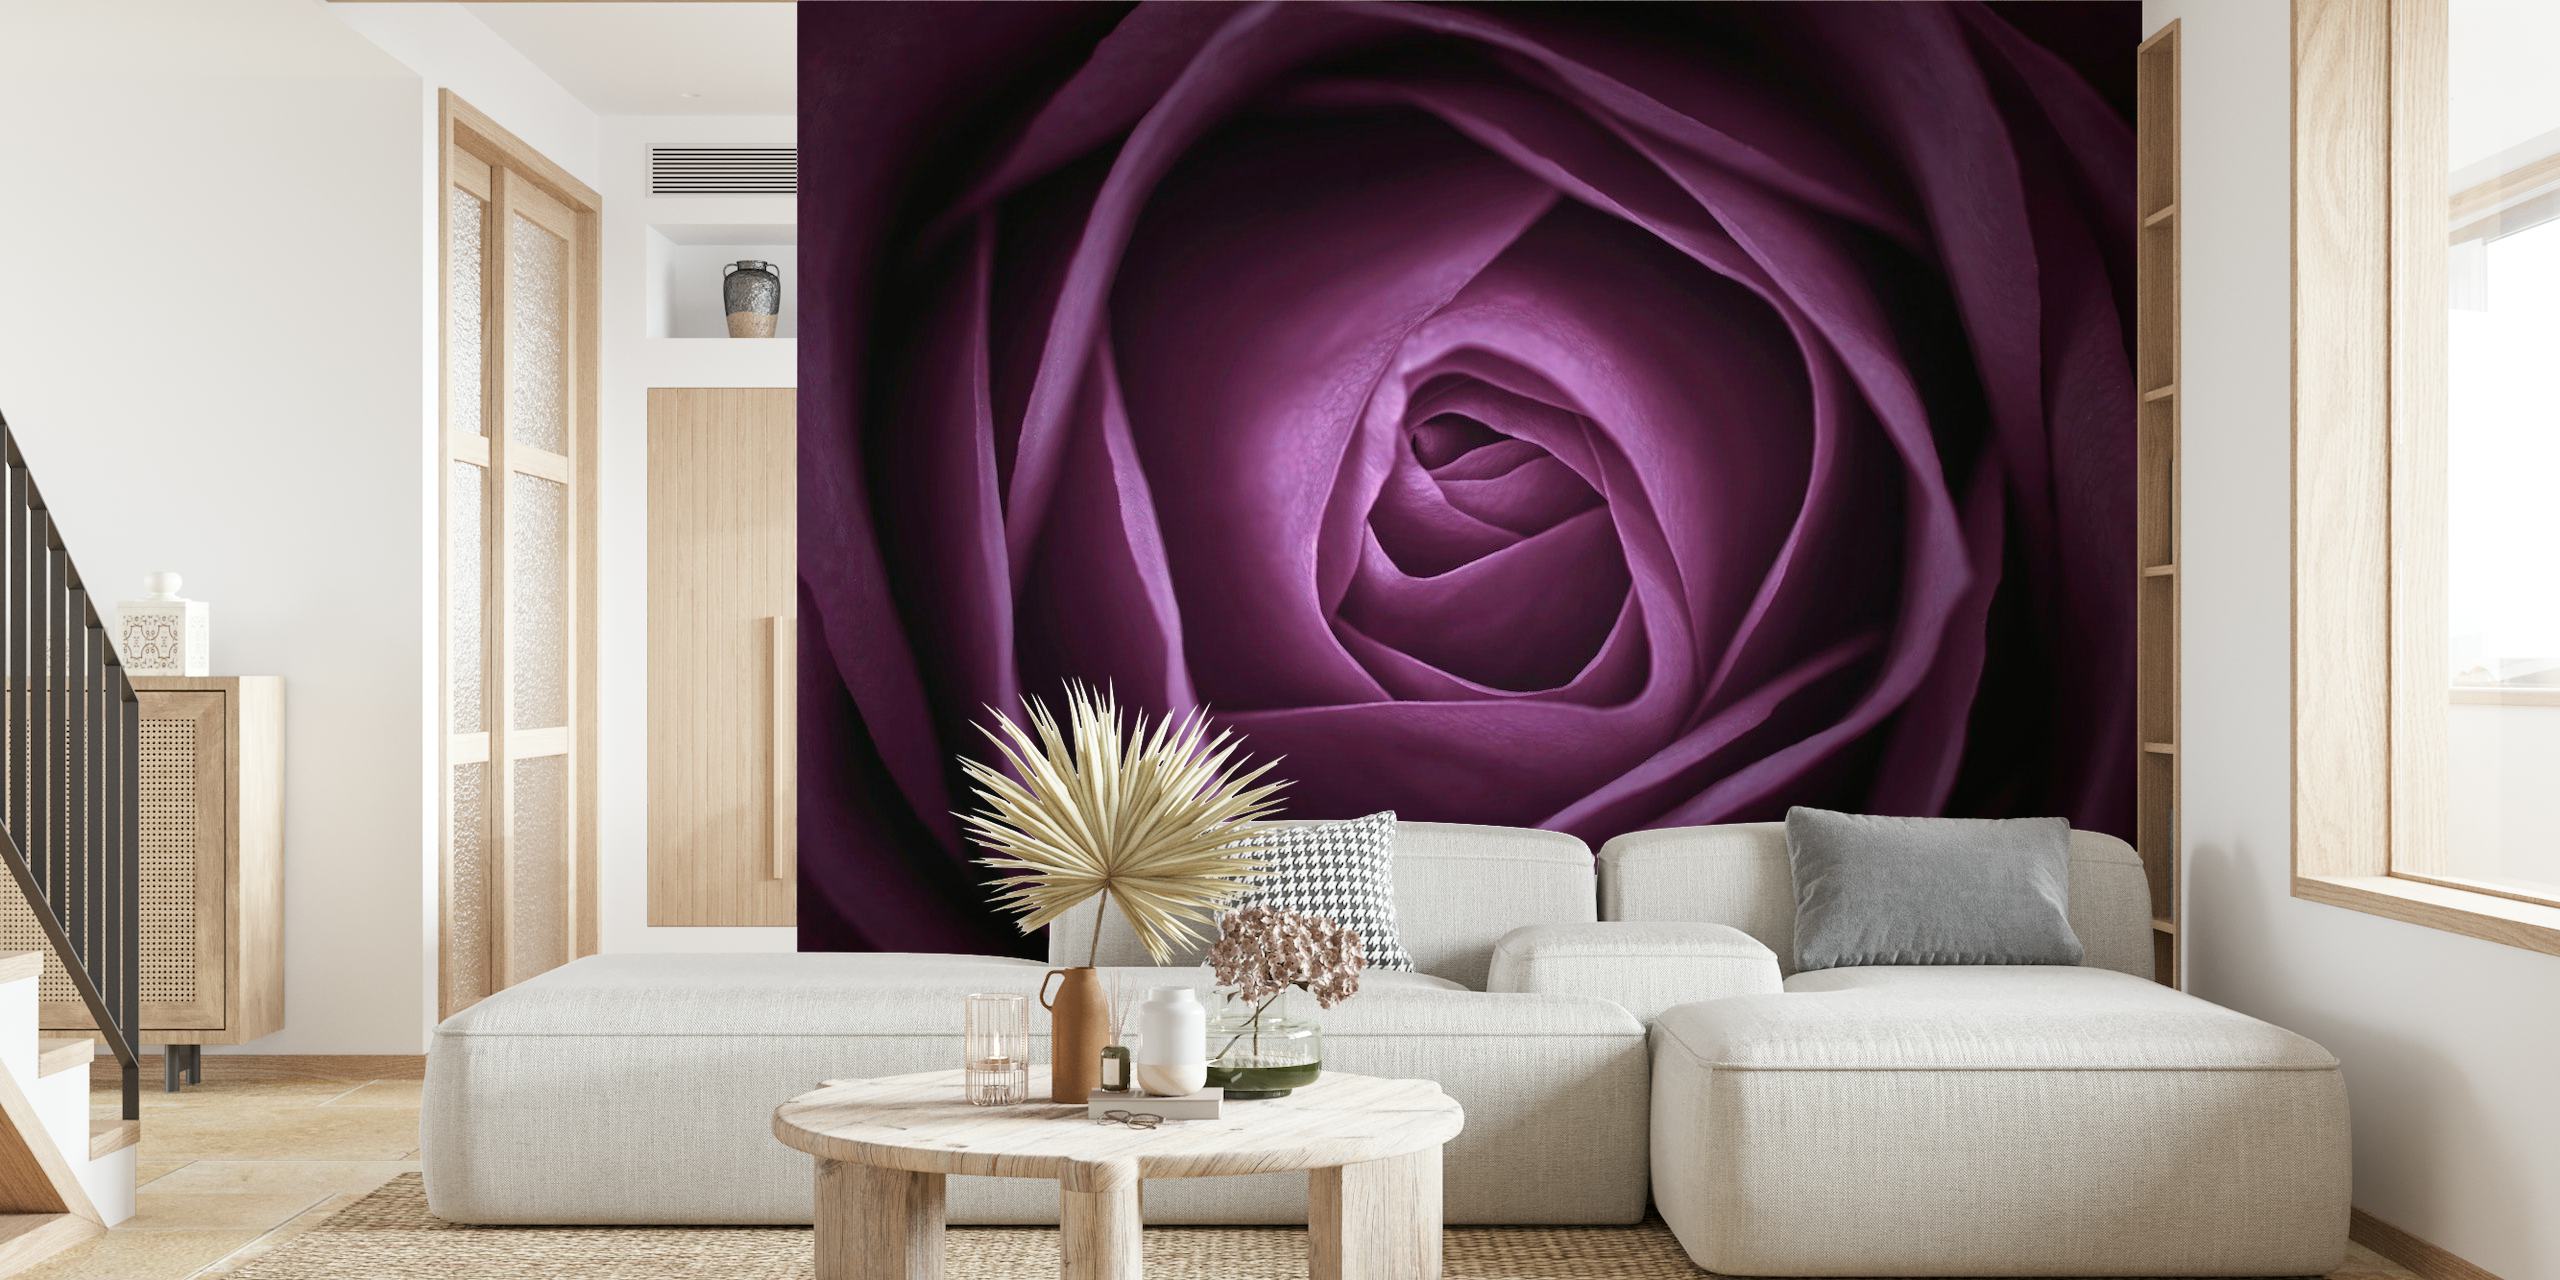 Close-up of a purple rose wall mural with layered petals